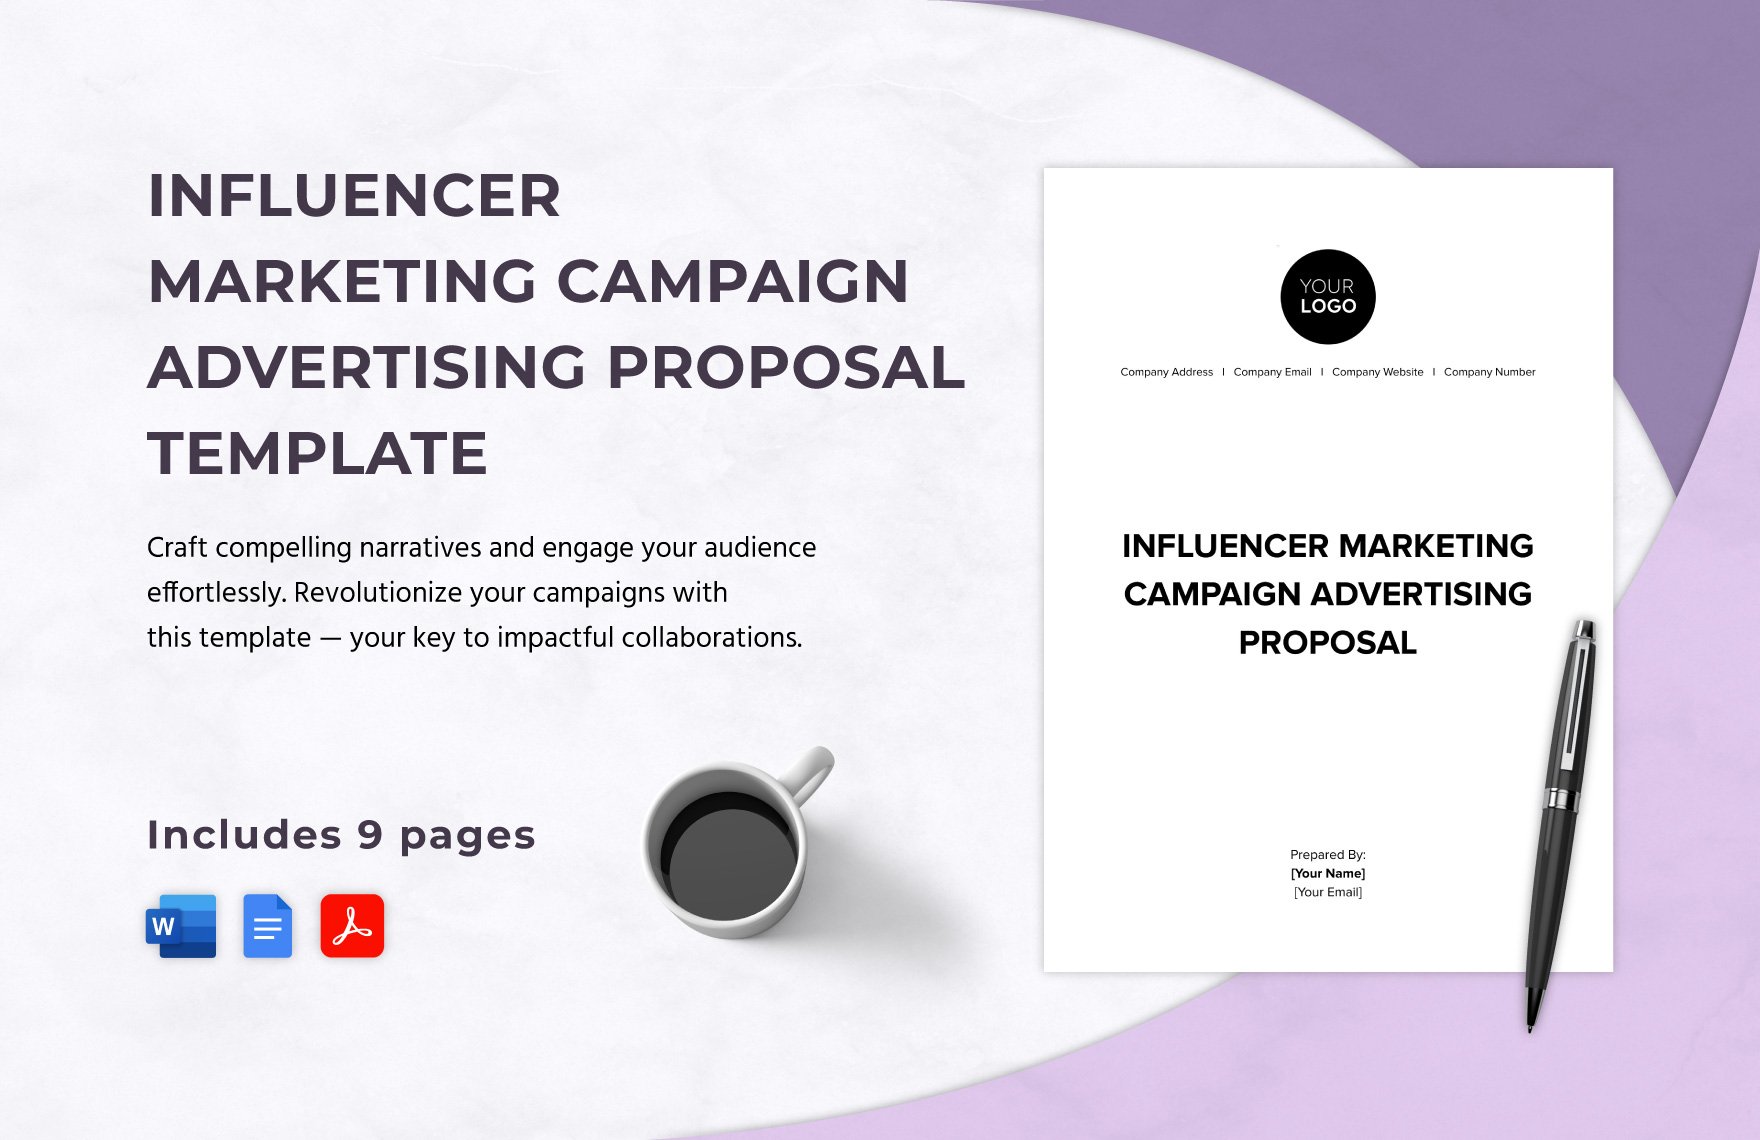 Influencer Marketing Campaign Advertising Proposal Template in Word, Google Docs, PDF